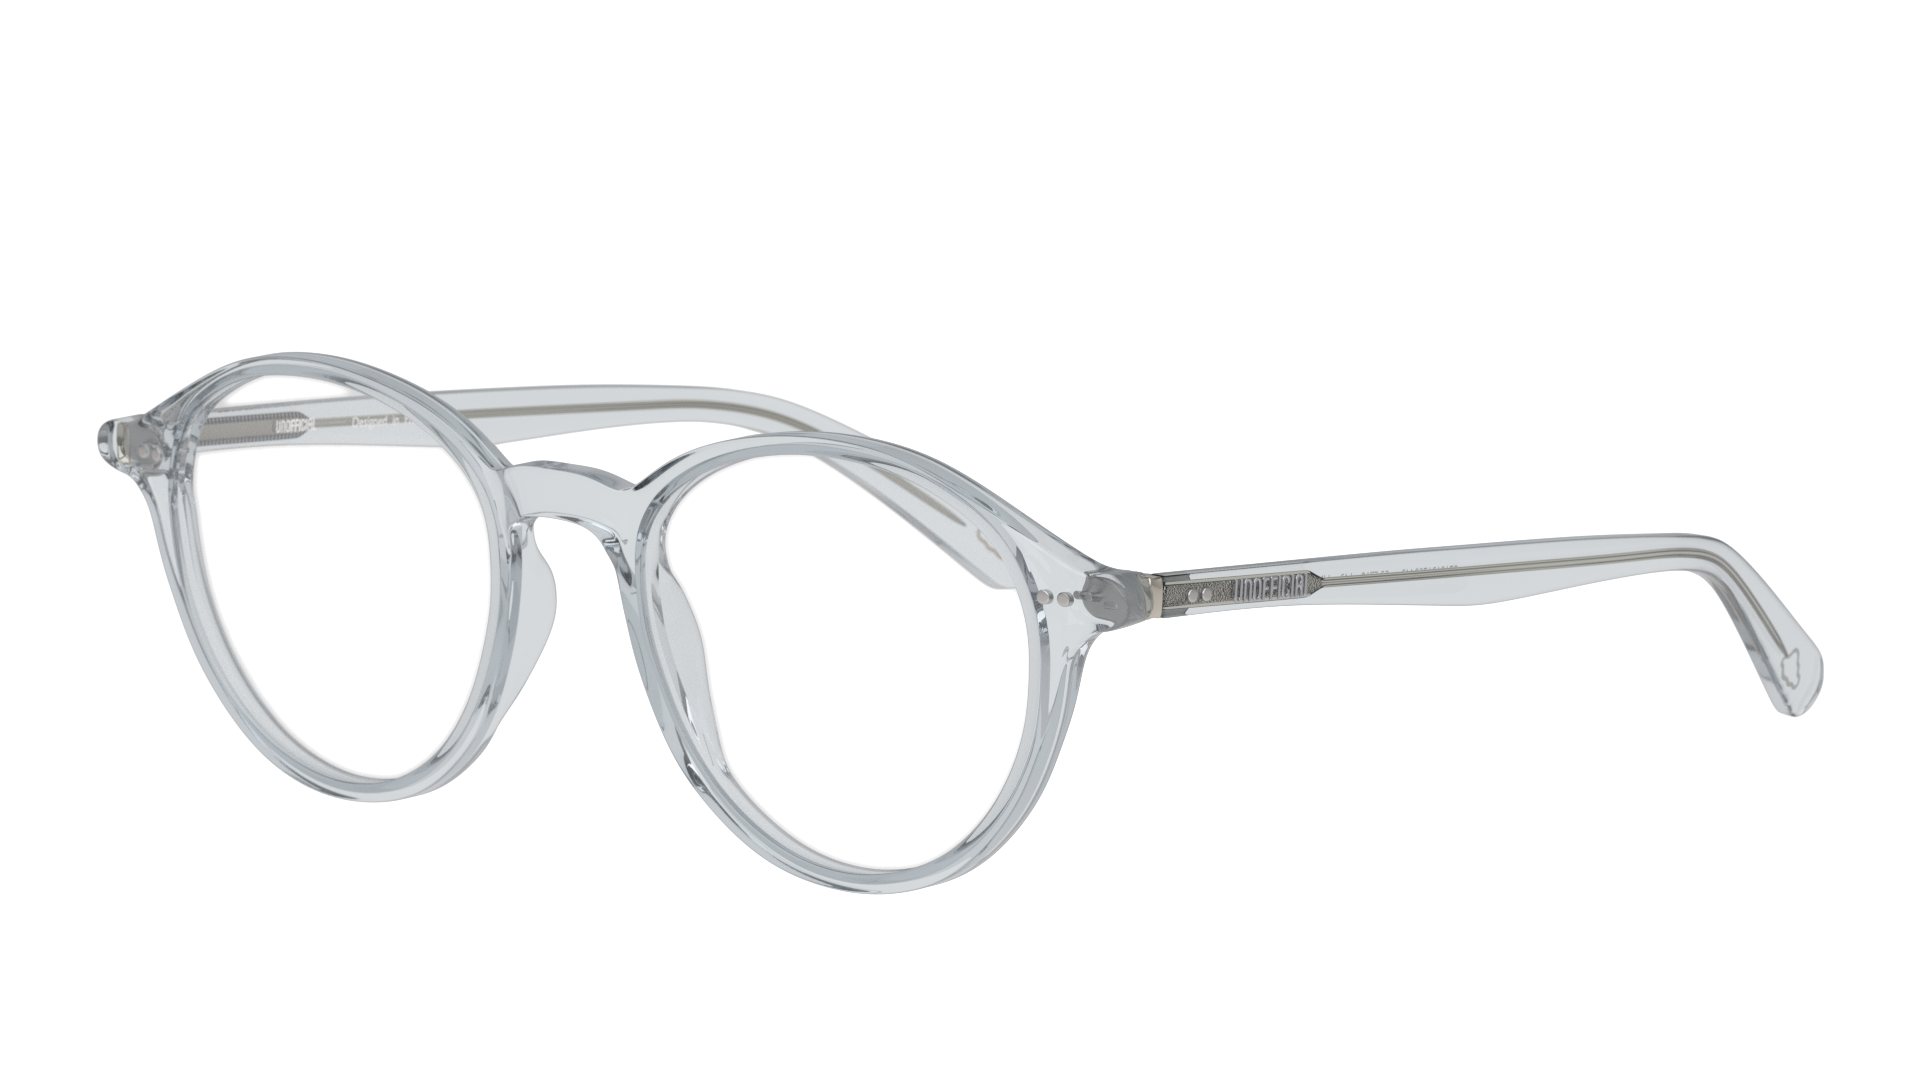 Angle_Left01 Unofficial UNOM0185 (GG00) Glasses Transparent / Grey